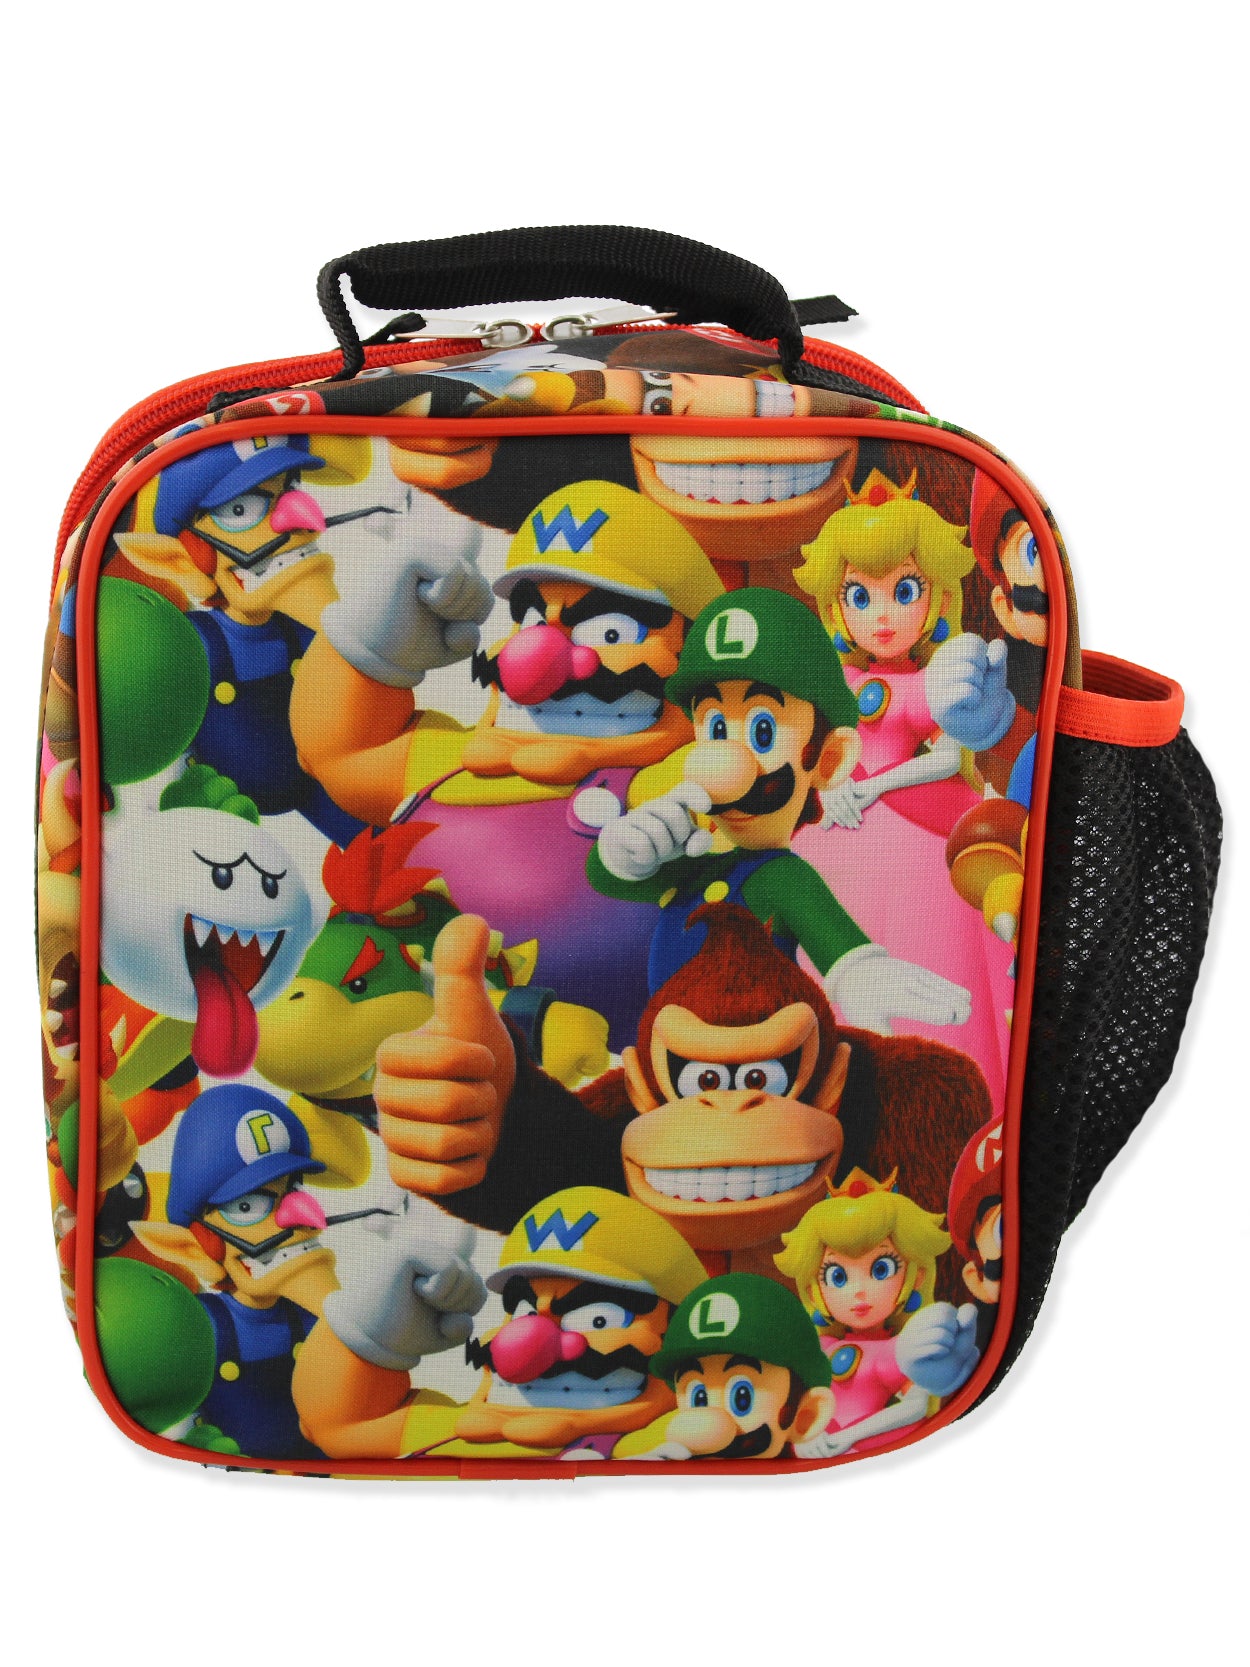 New Movie Super Mario Bros. Lunch Bag Mario Elementary School Students  Portable Ice Bag Children Kids Bags for Girls